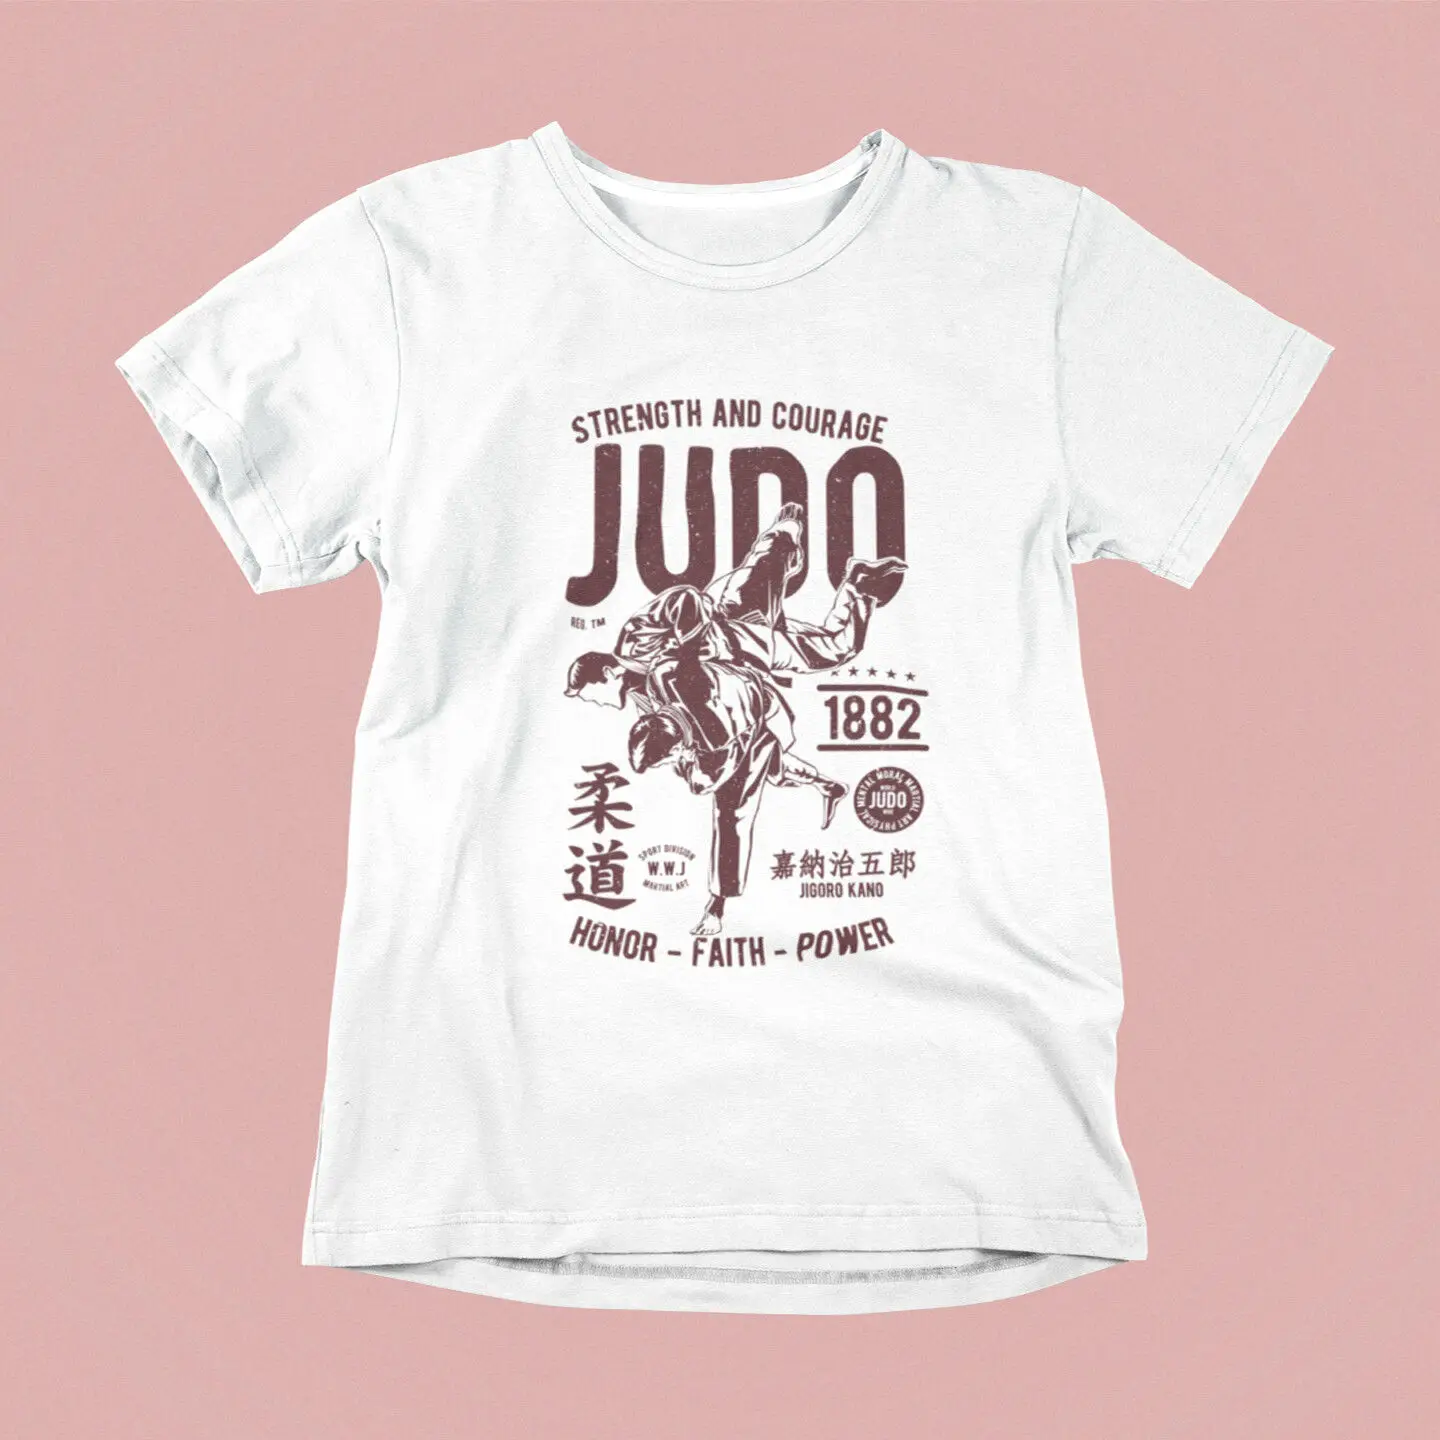 

Judo Strength and Courage Men's T-Shirt Cotton Round Neck Short Sleeve T-Shirt Size S-3XL